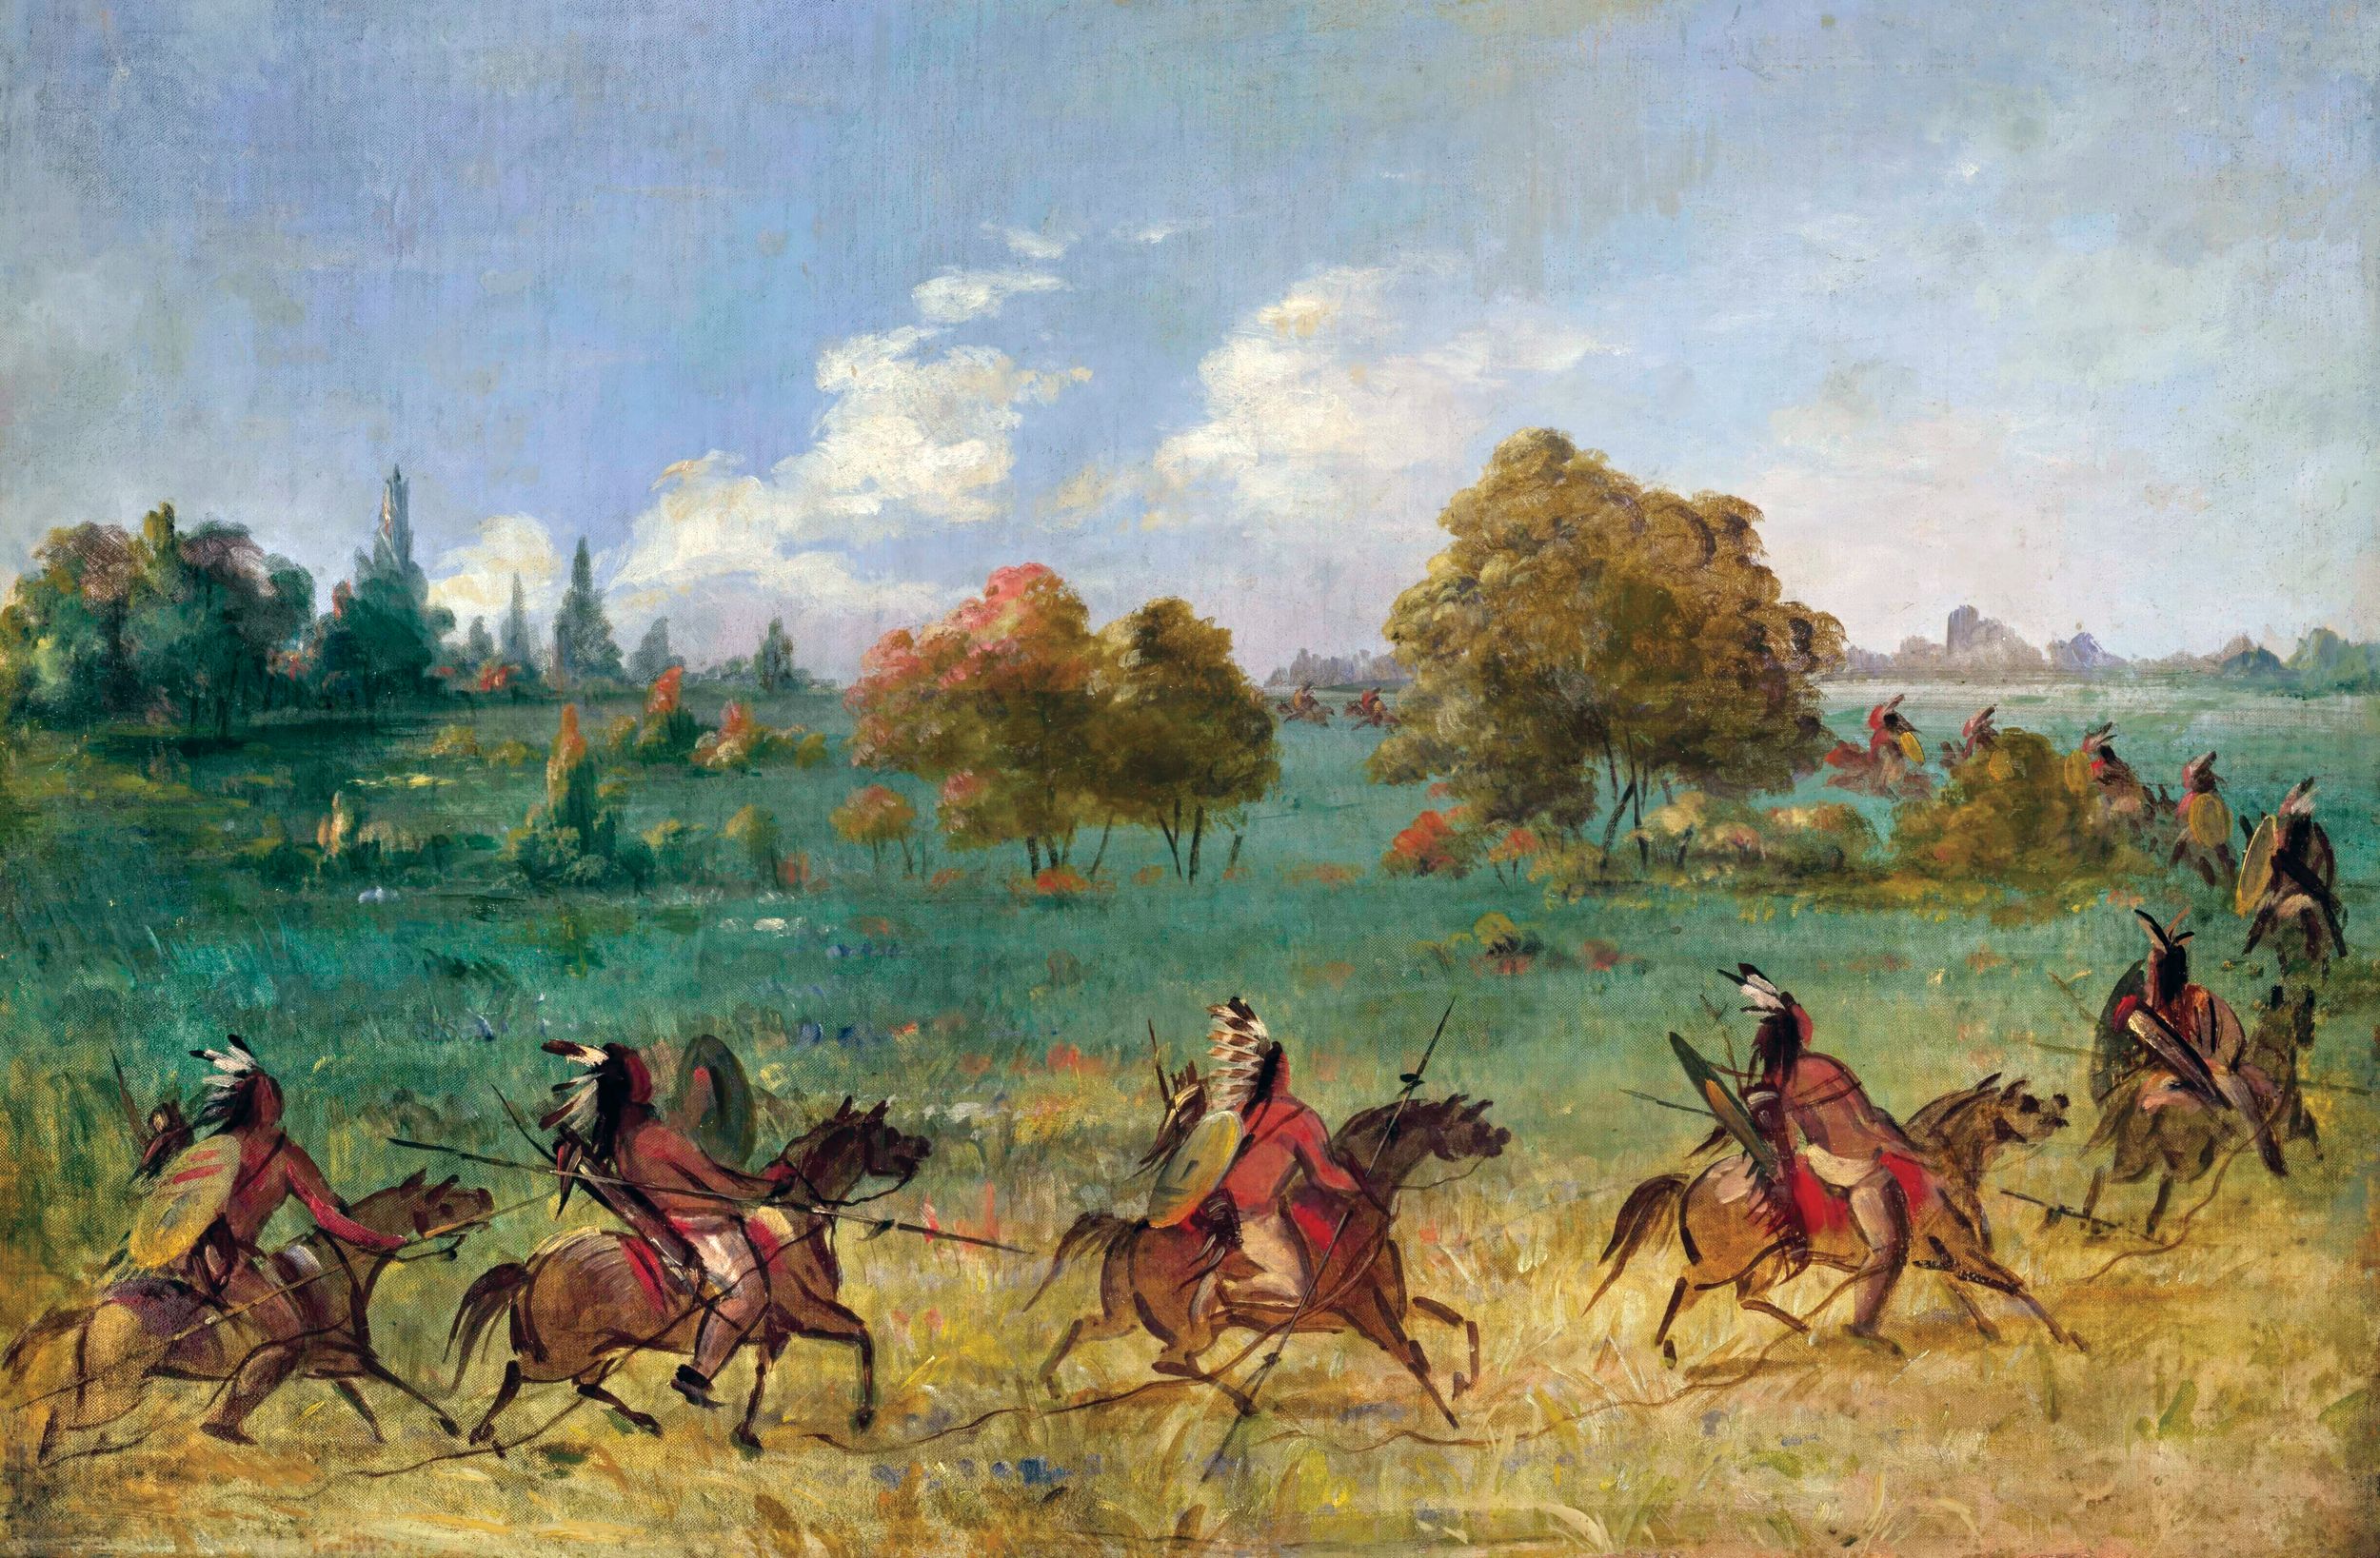 A Comanche war party, painted by George Catlin. Buffalo Hump’s raiding party of 1840 has been estimated to include as many as 1,000 Comanches, including  500 warriors. Catlin began a journey through the west in 1830, visiting 18 tribes, and eventually completing over 500 paintings of what he witnessed.